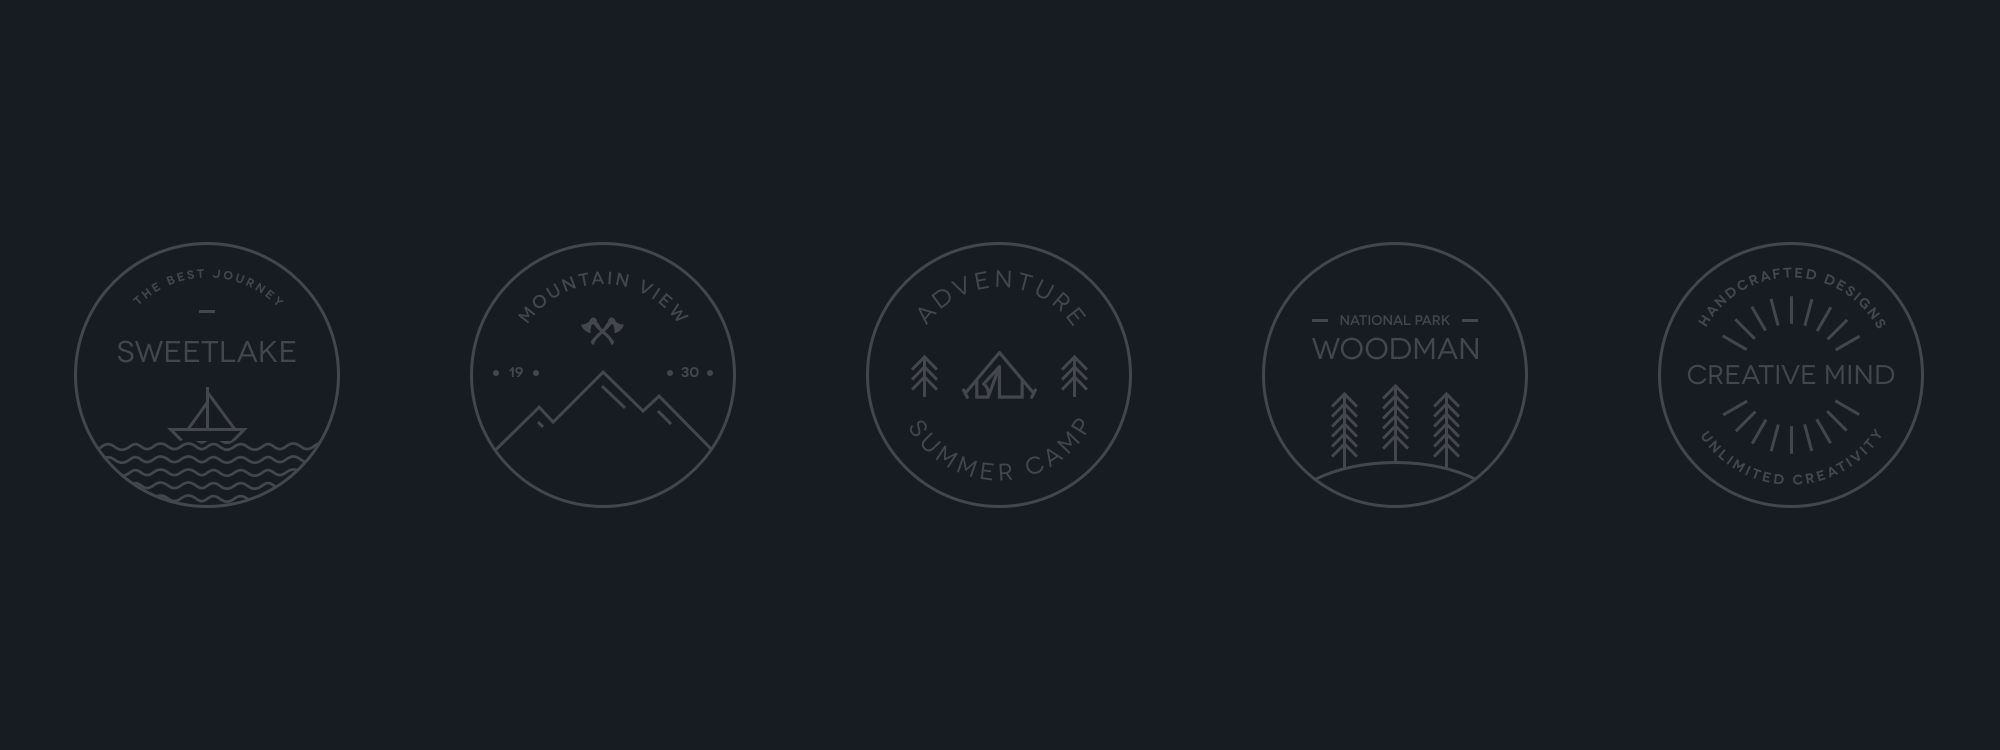 10 vector badge templates for designing logos—free!